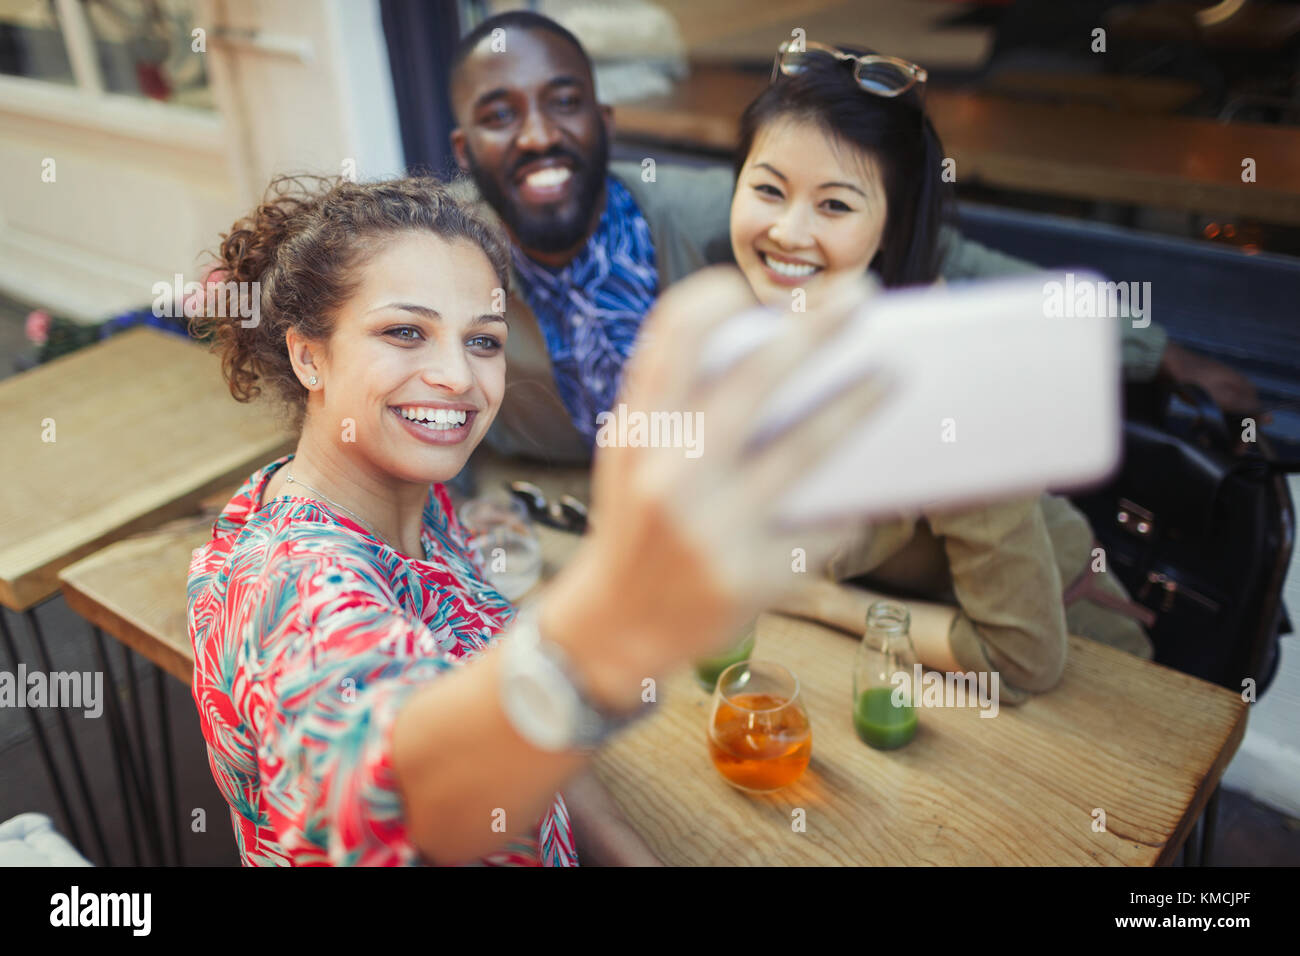 Smiling young friends taking selfie with camera phone at sidewalk cafe Stock Photo